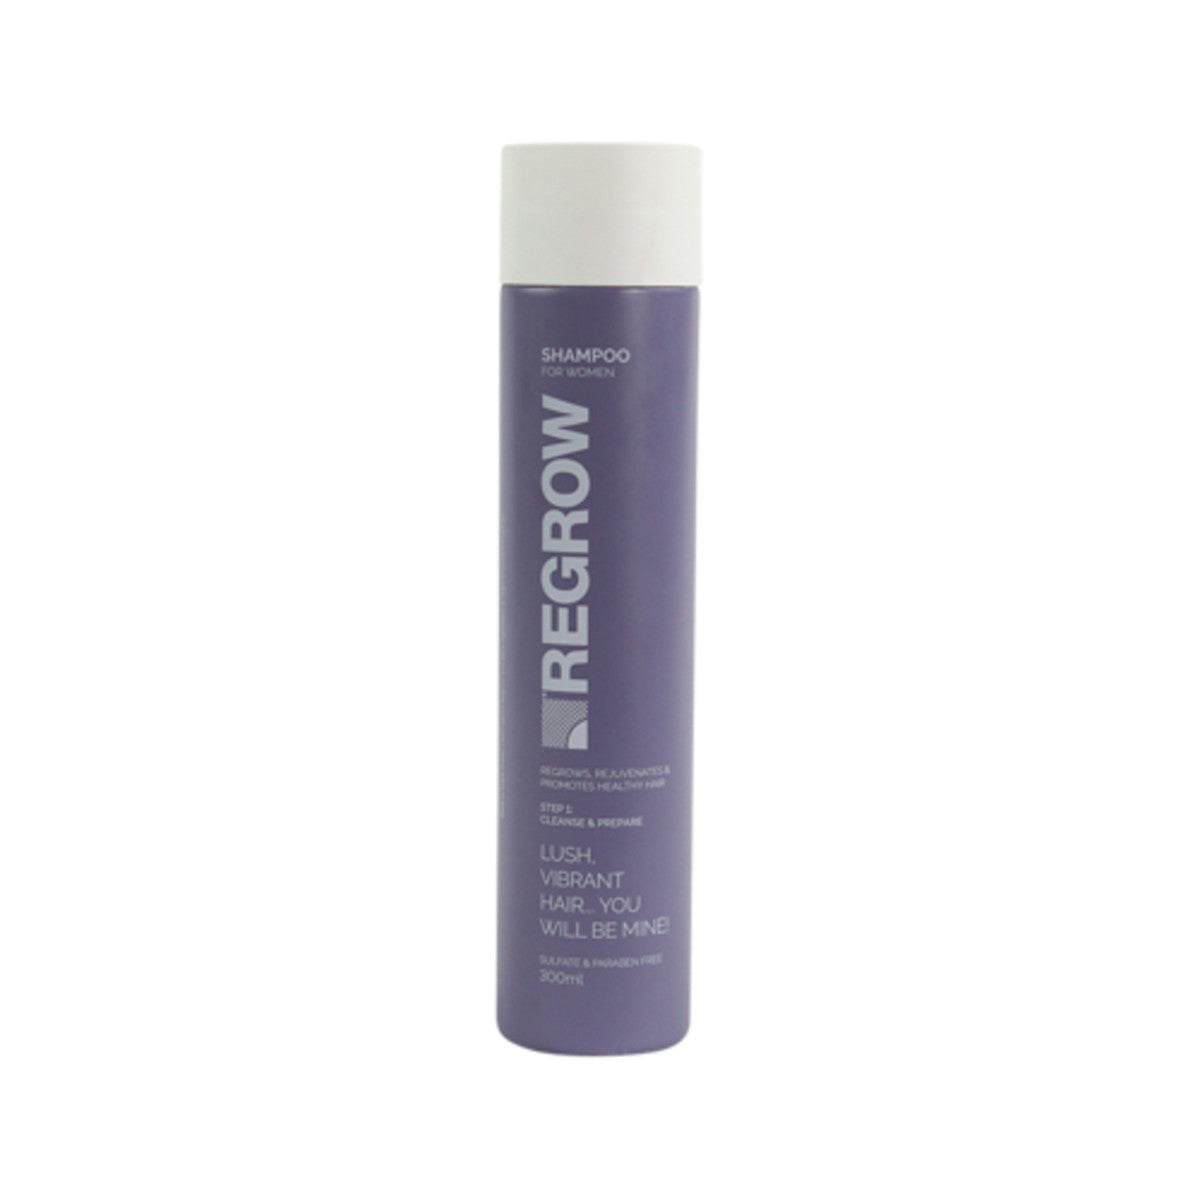 image of Regrow Hair Clinics Shampoo For Women (Cleanse & Prepare) 300ml on white background 